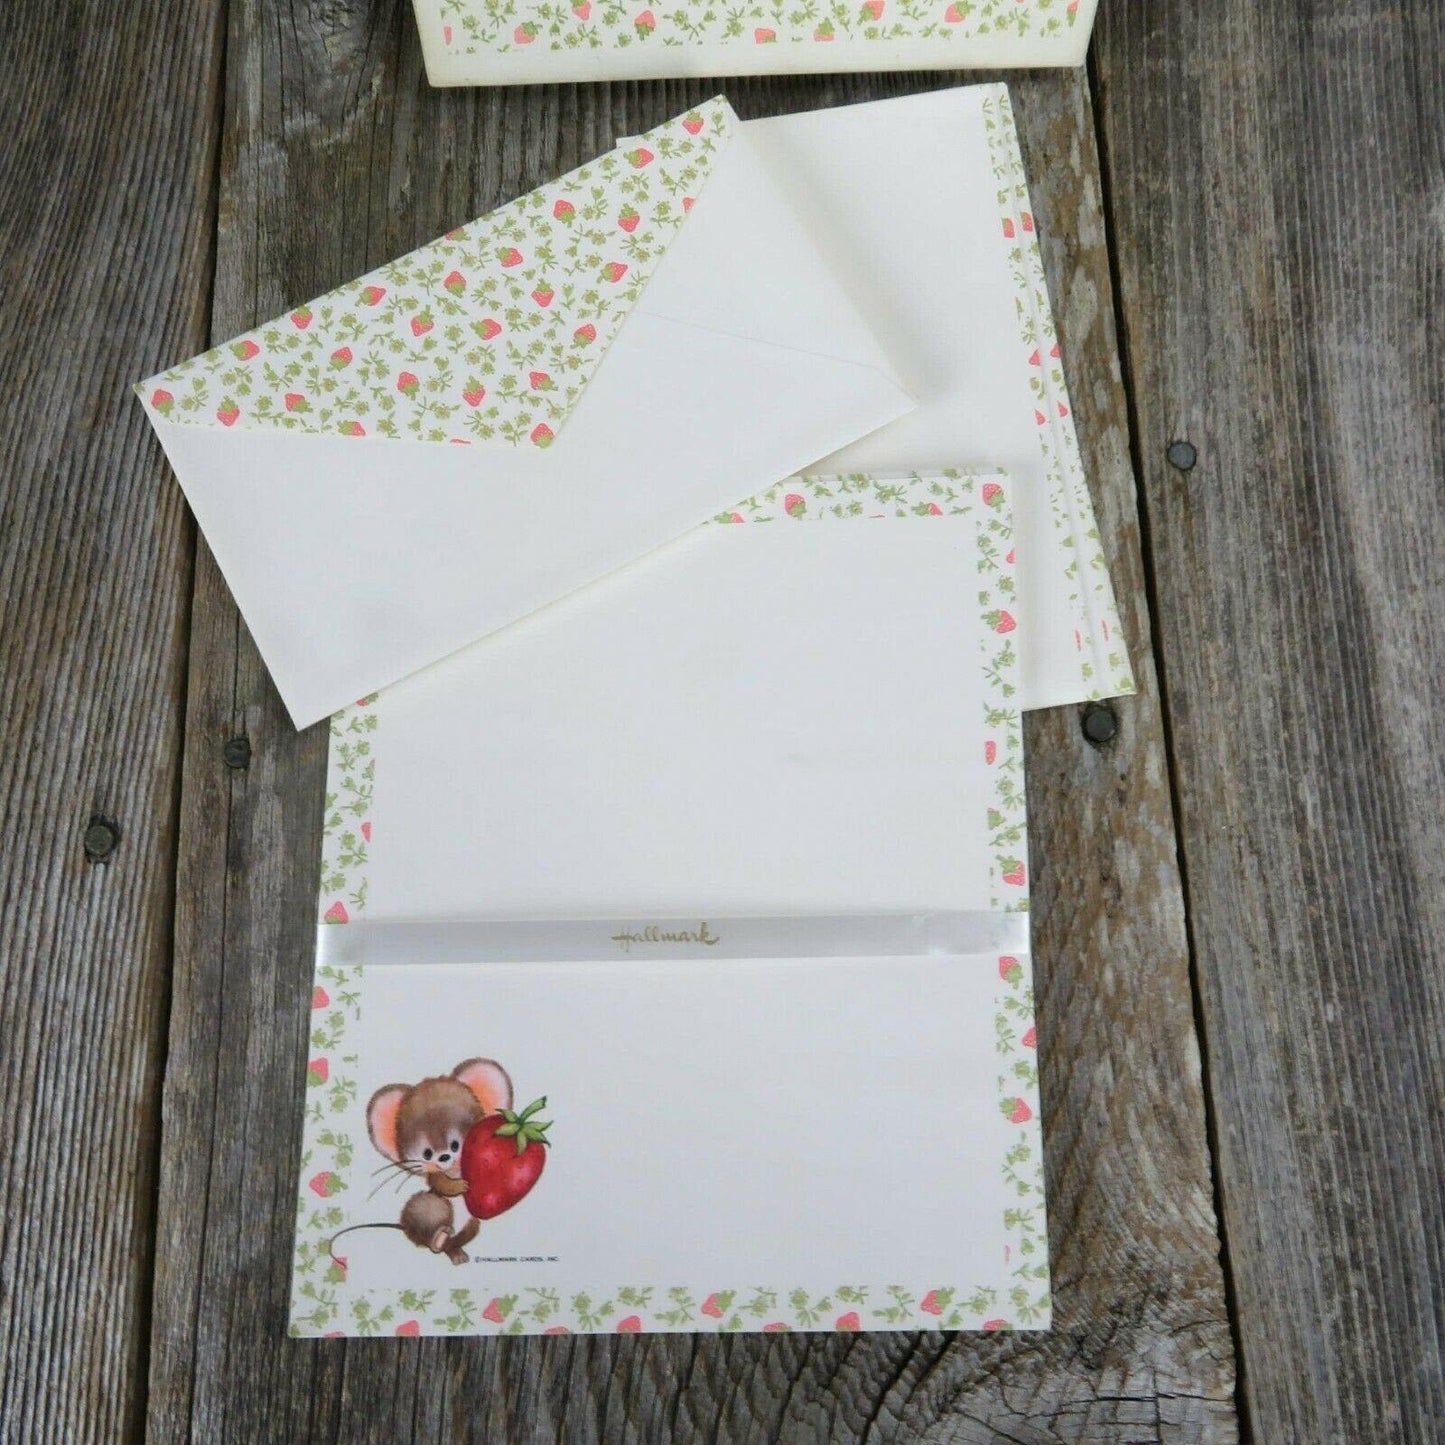 Vintage Hallmark Stationery Mouse with Strawberry Writing Paper Envelopes Letter